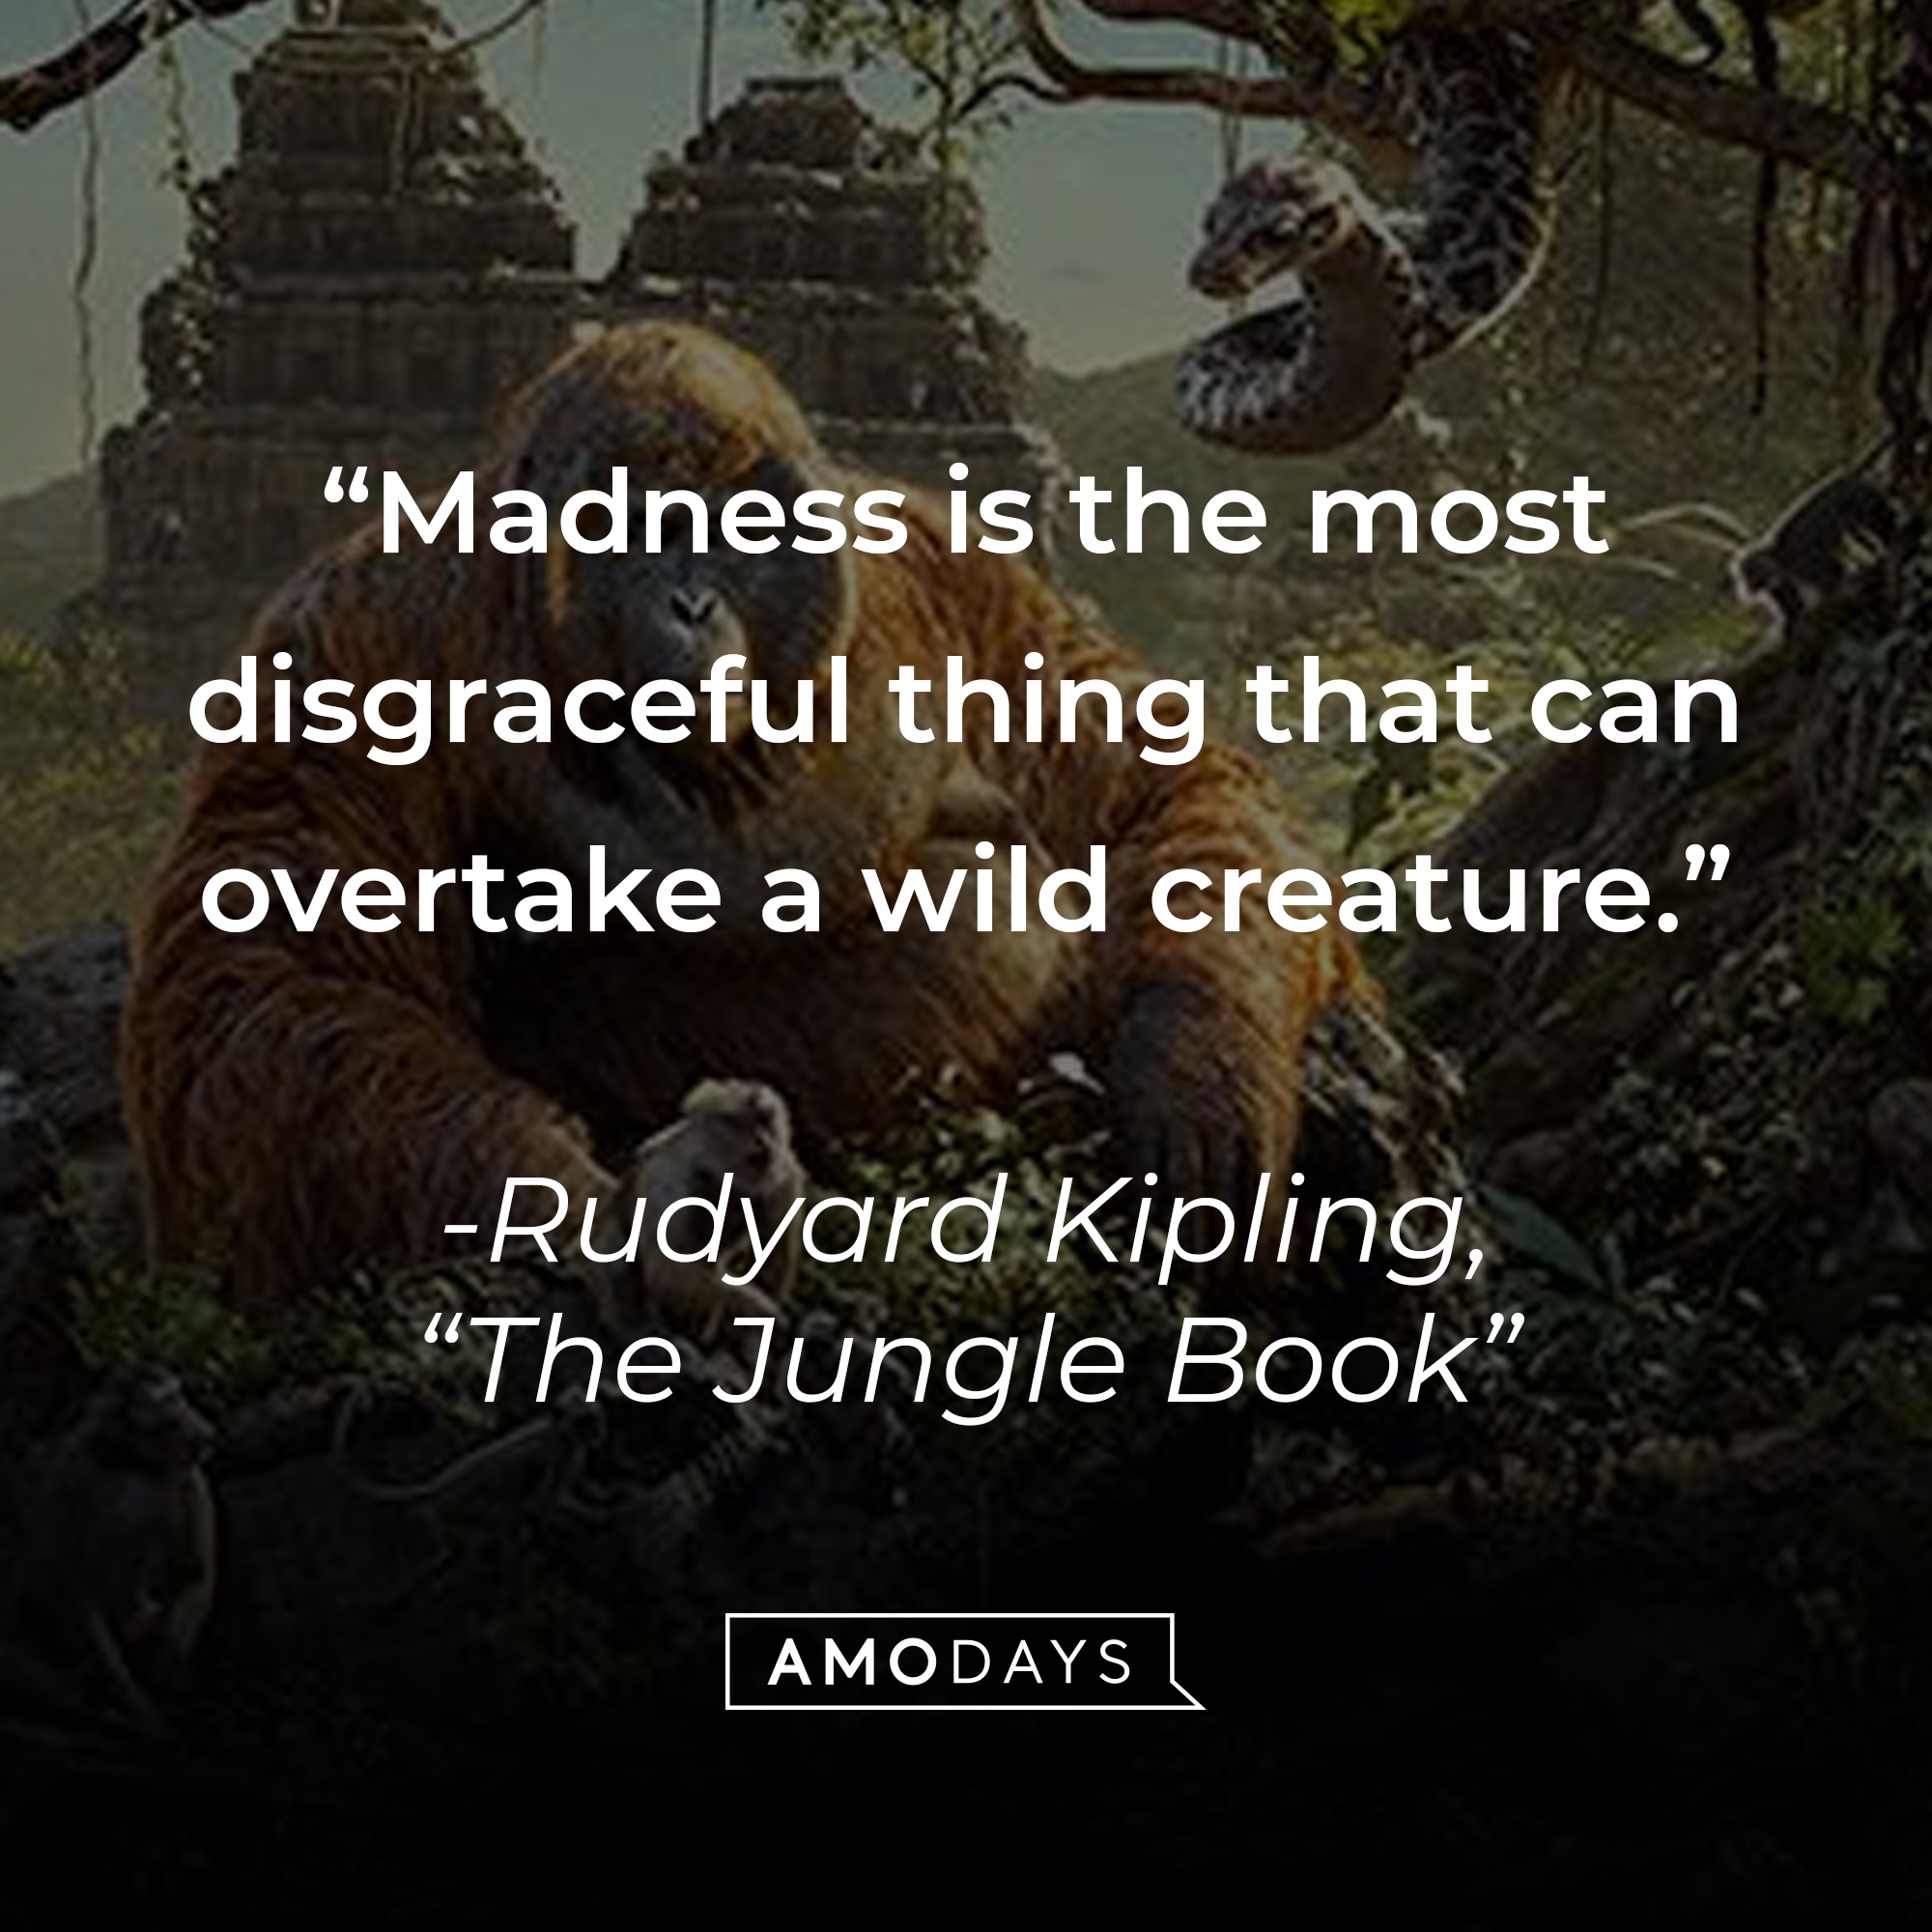 Rudyard Kipling's quote: "Madness is the most disgraceful thing that can overtake a wild creature." | Source: facebook.com/DisneyJungleBook